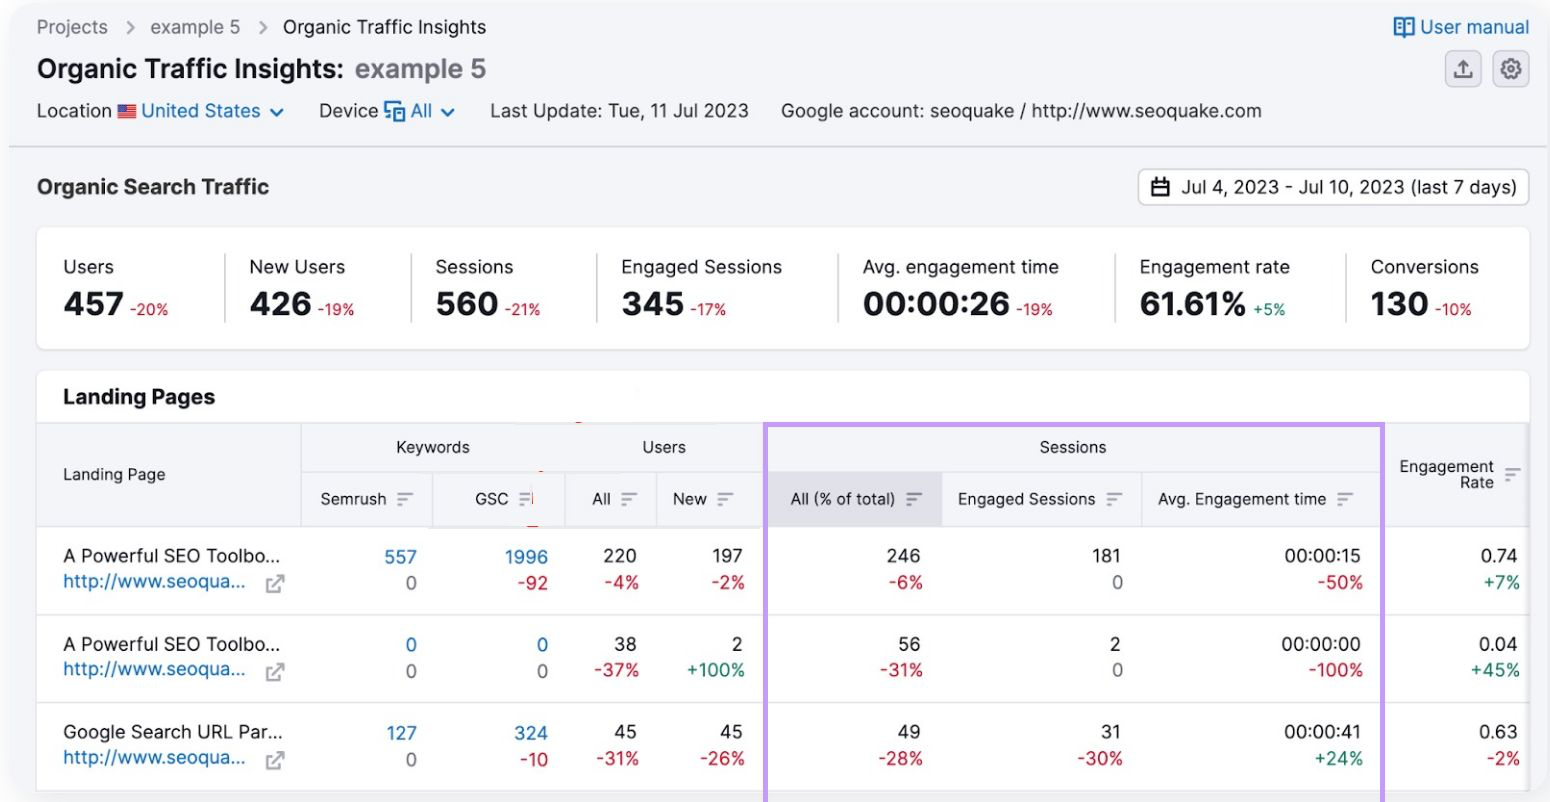 Organic search traffic overview screen showing metrics like keywords, users, sessions and engagement rate.